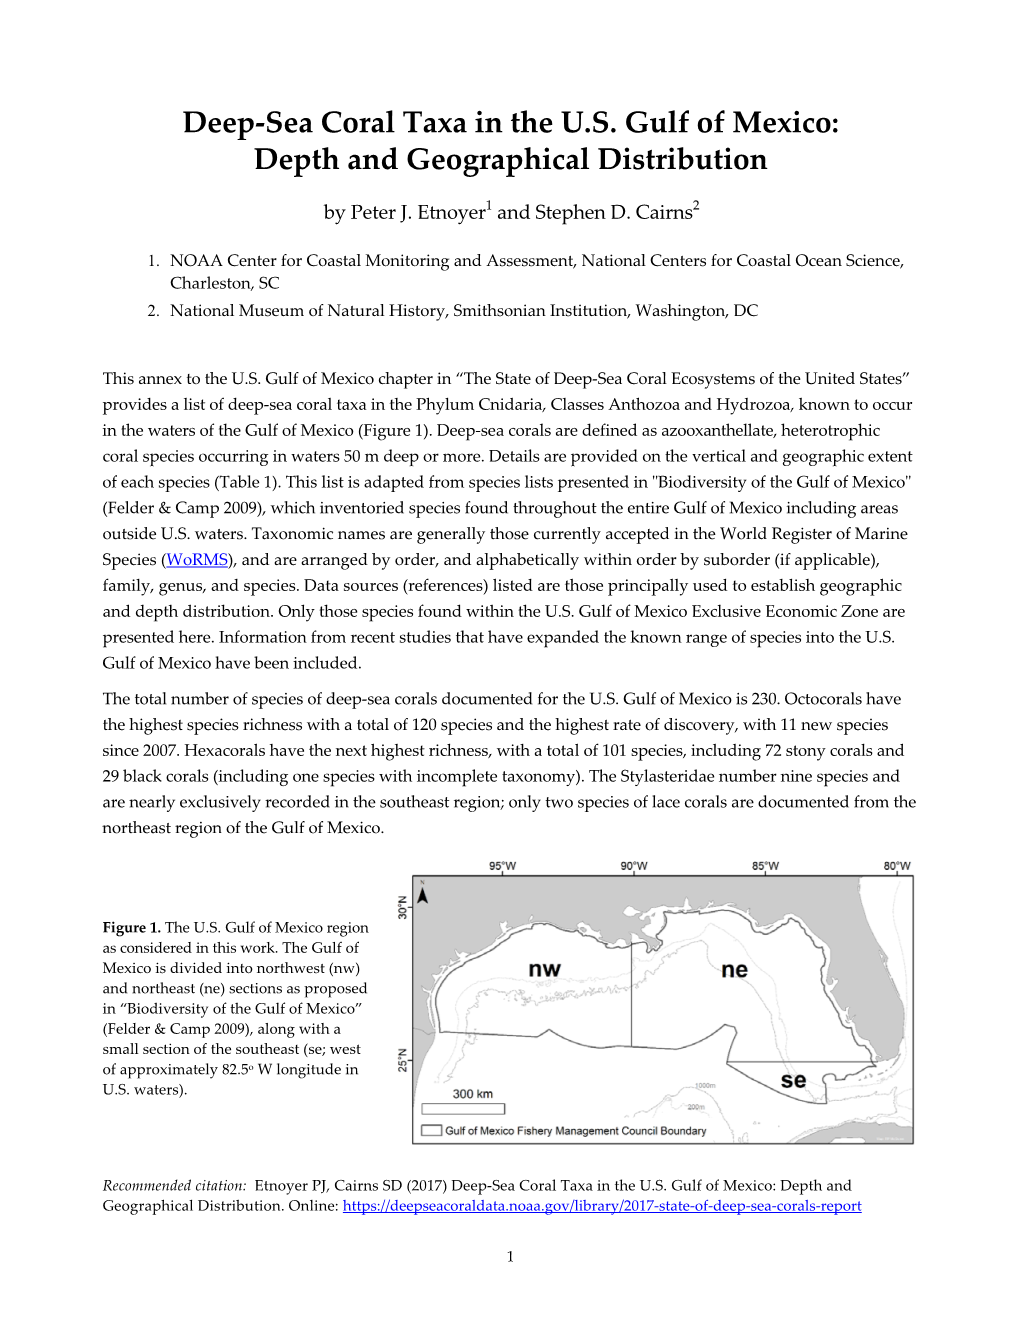 Deep‐Sea Coral Taxa in the U.S. Gulf of Mexico: Depth and Geographical Distribution